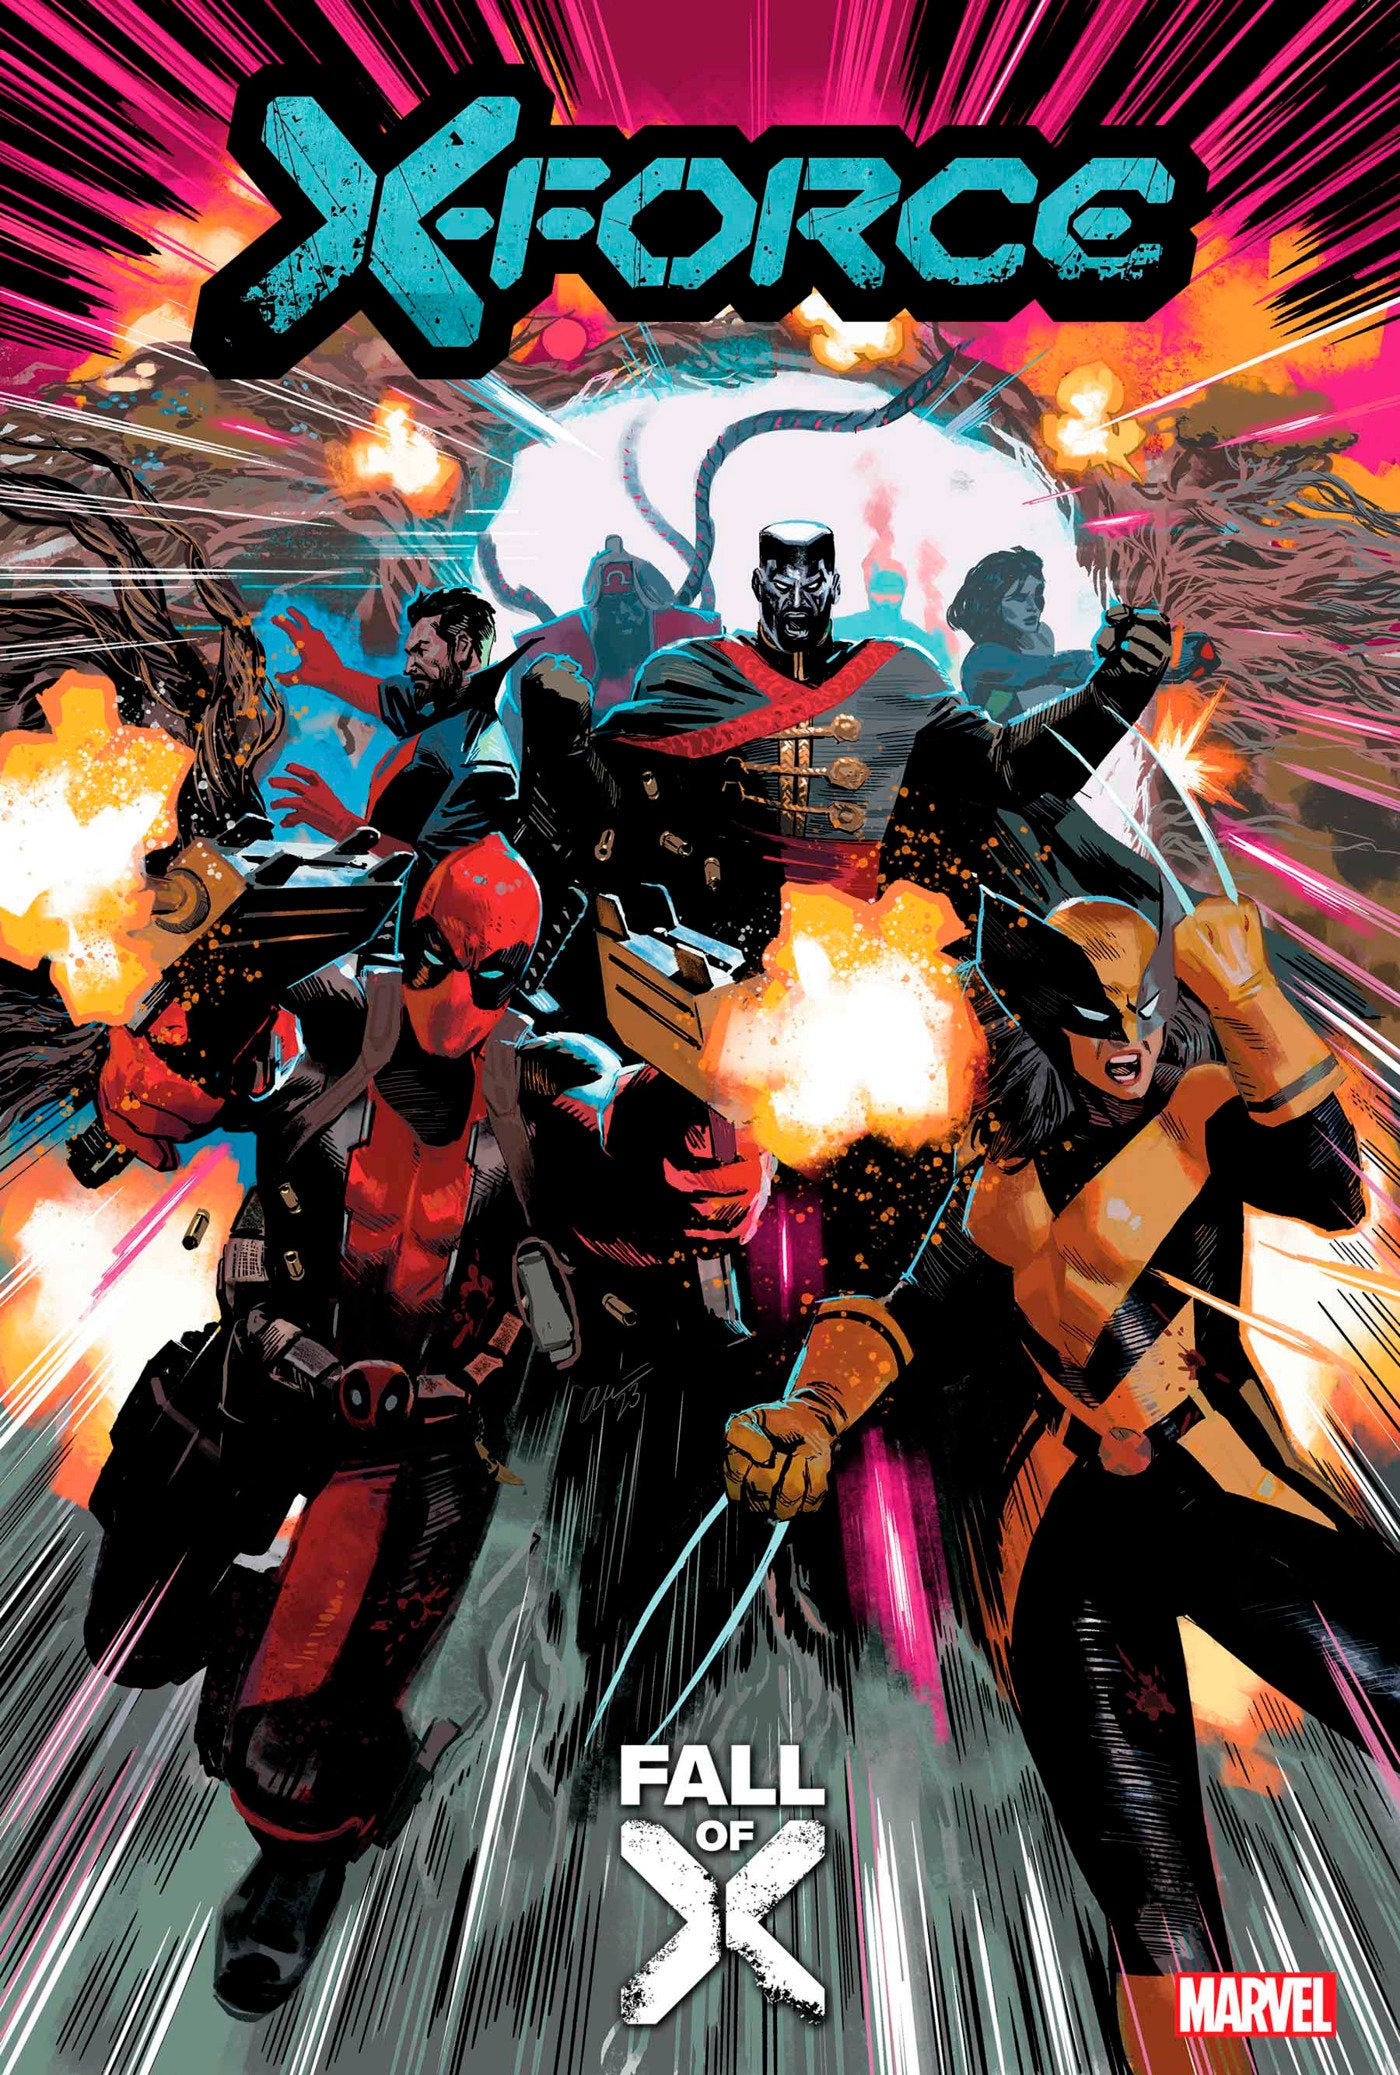 X-Force 43 [Fall] | Game Master's Emporium (The New GME)